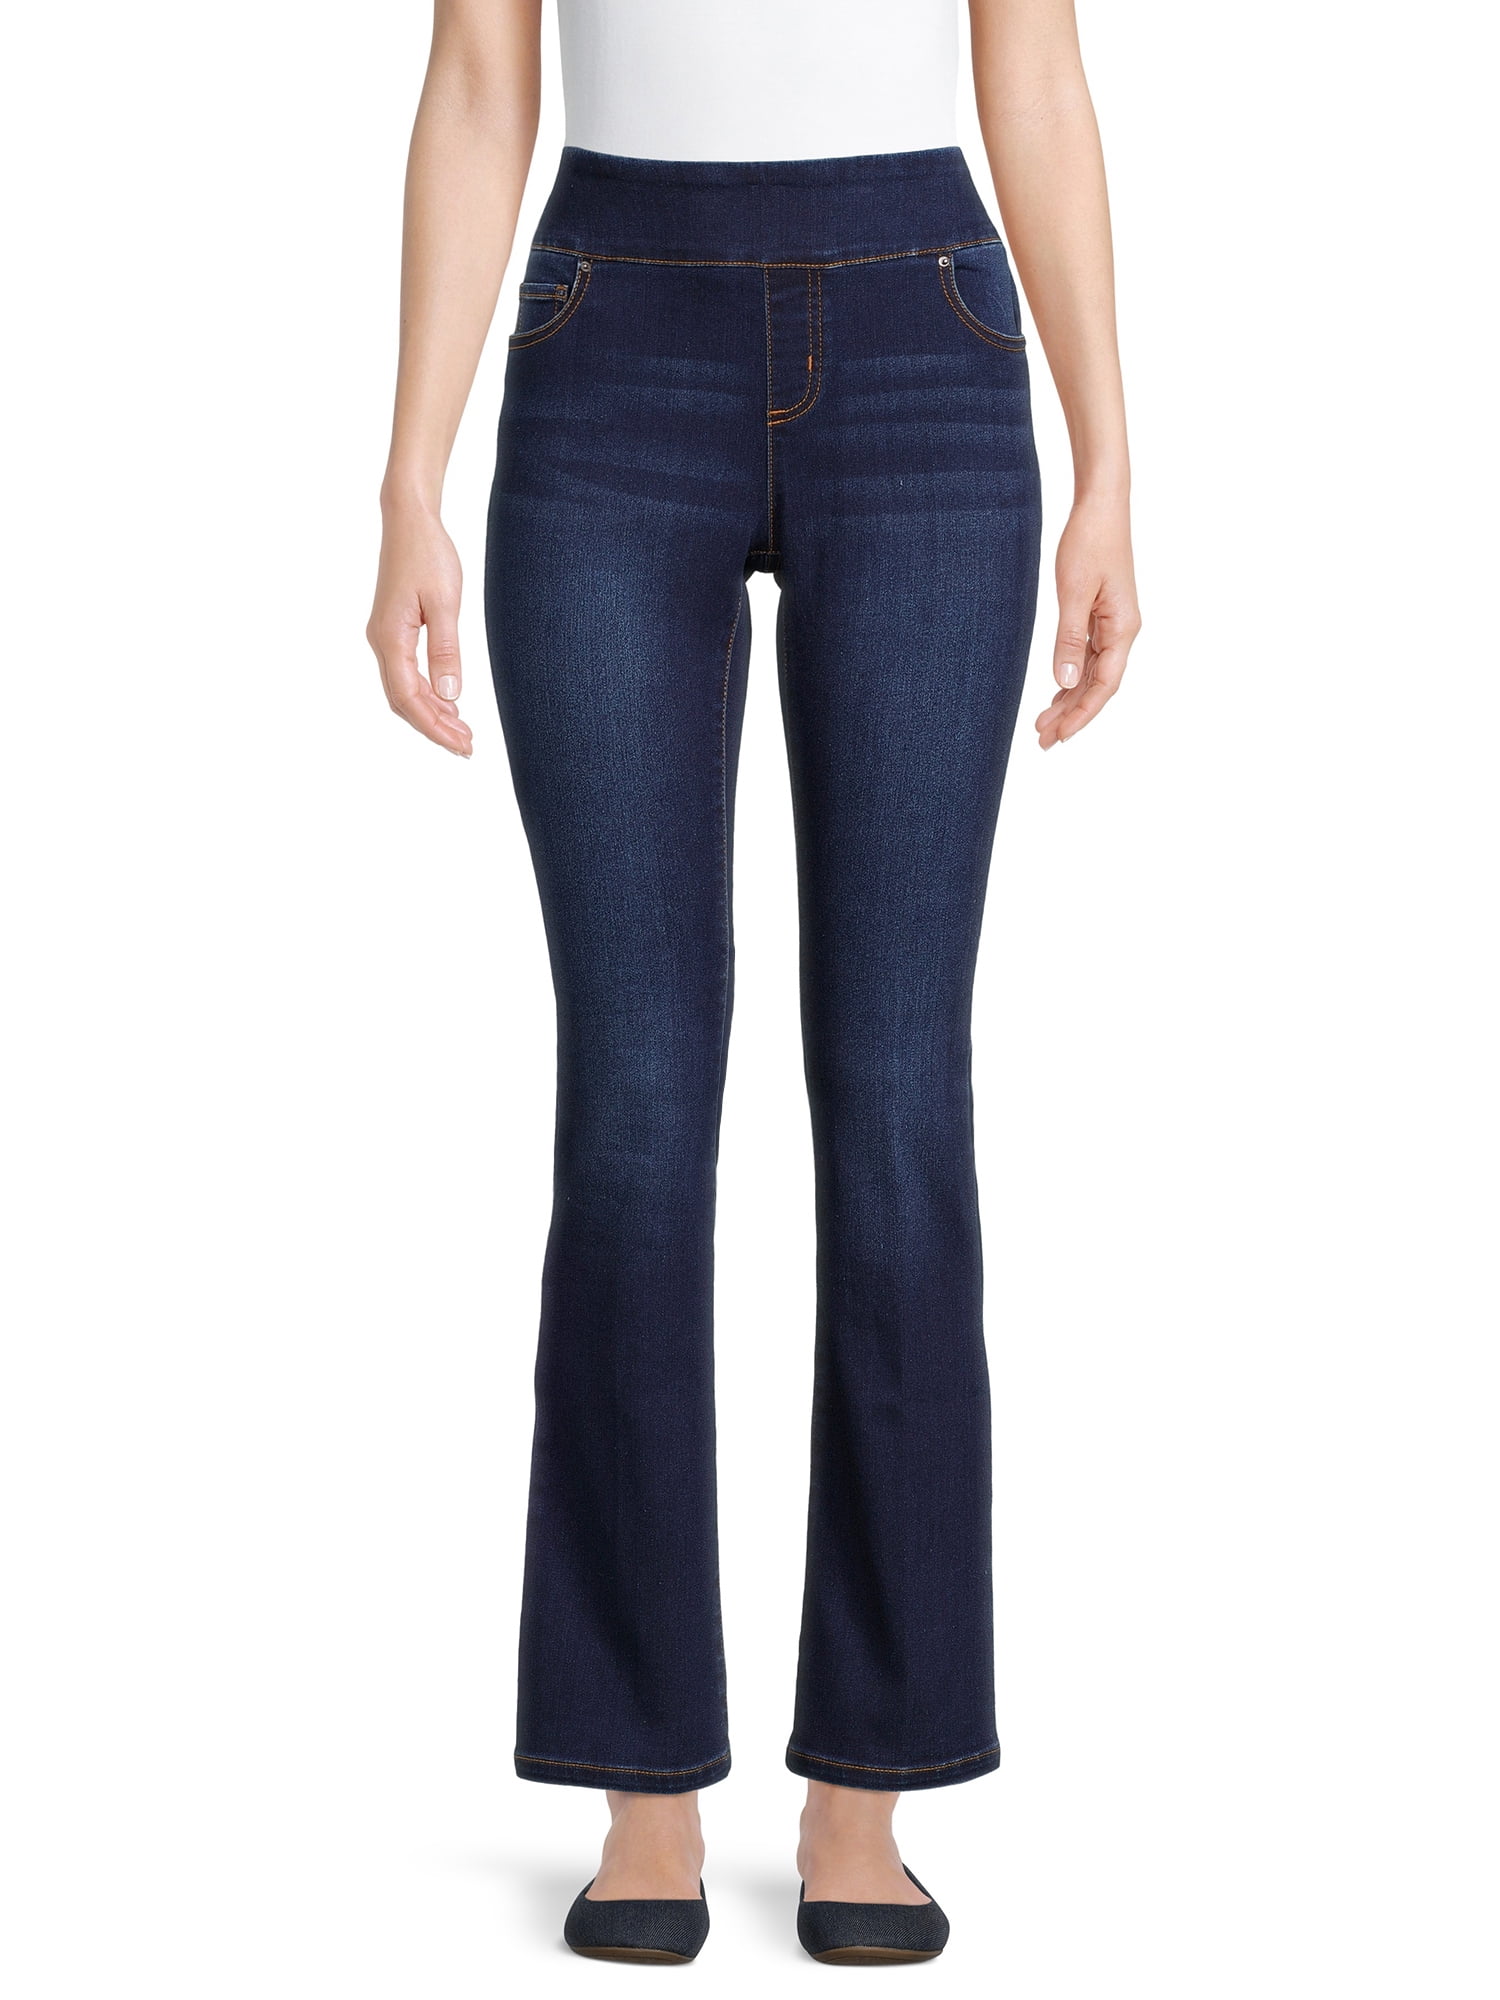 Find Your Perfect Fit: Levi Strauss Signature Totally Shaping Boot Cut Jeans Review